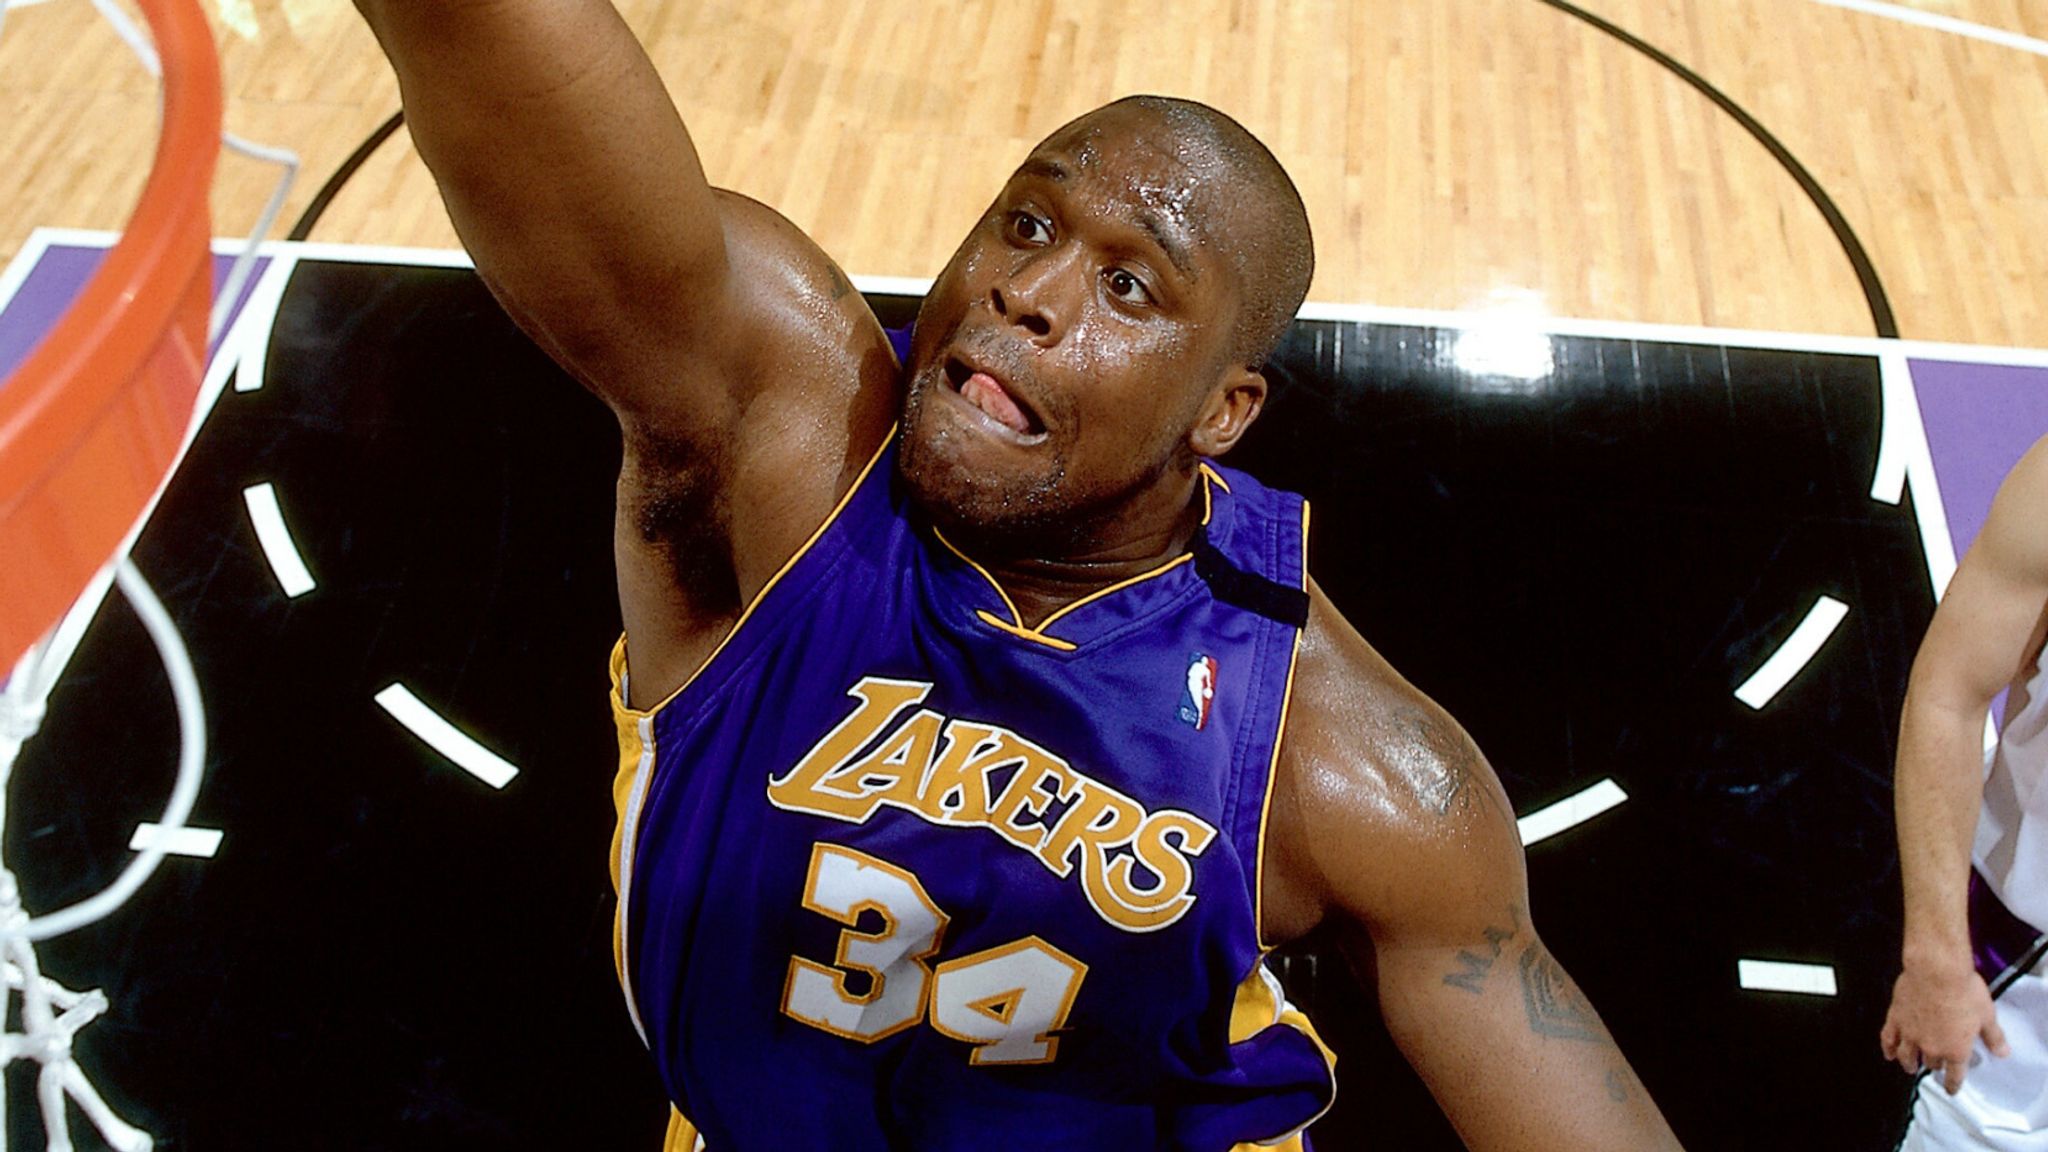 Most iconic NBA numbers: #34 – Shaquille O'Neal, Charles Barkley